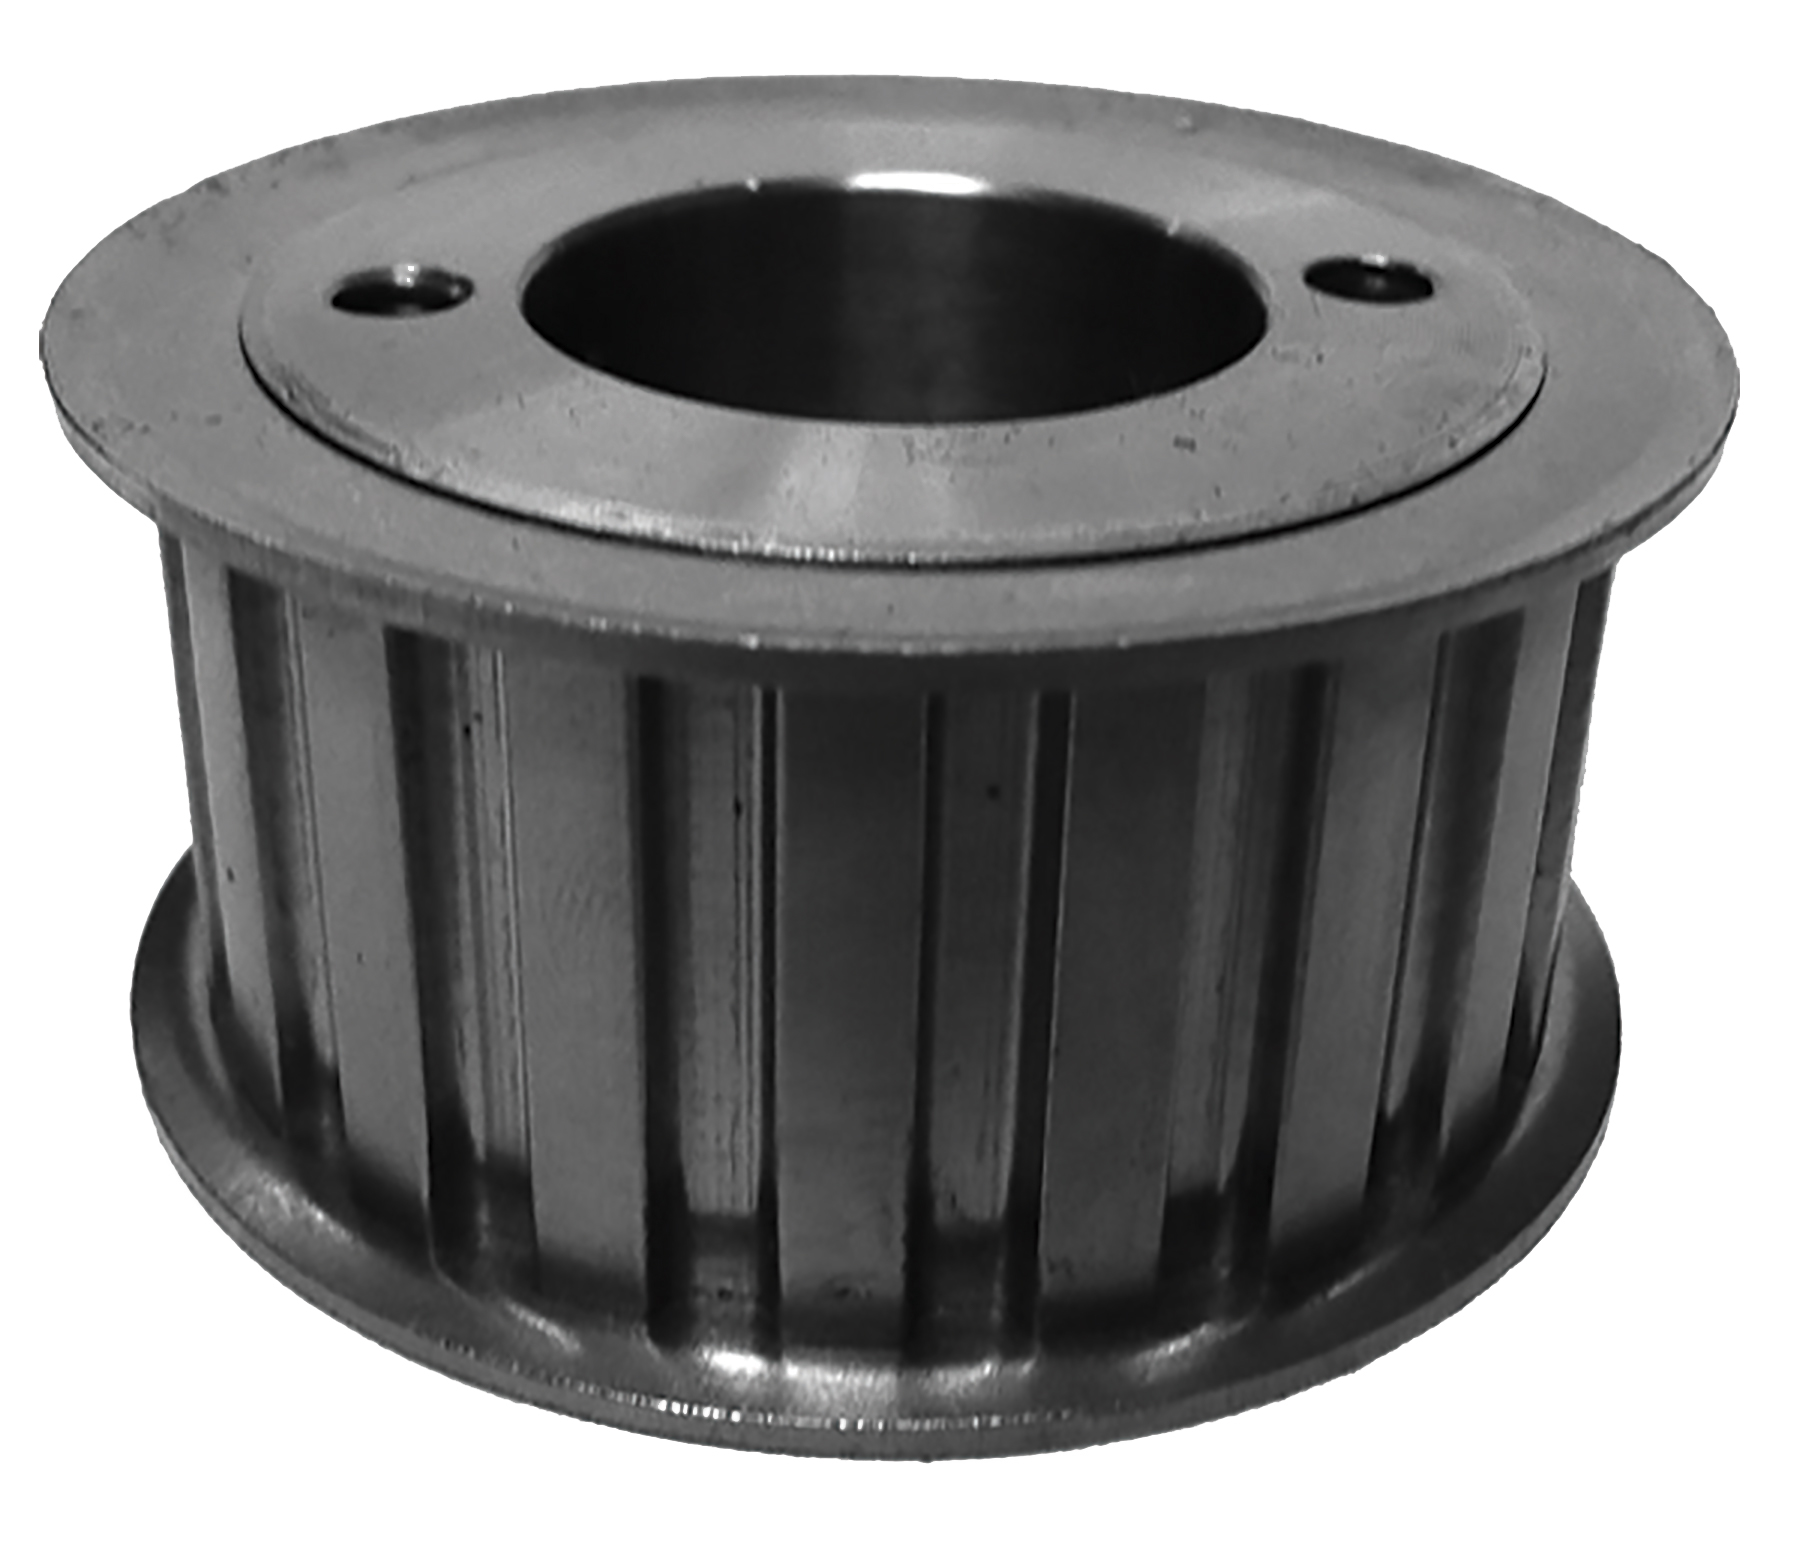 21LG100 - Steel Imperial Pitch Pulleys